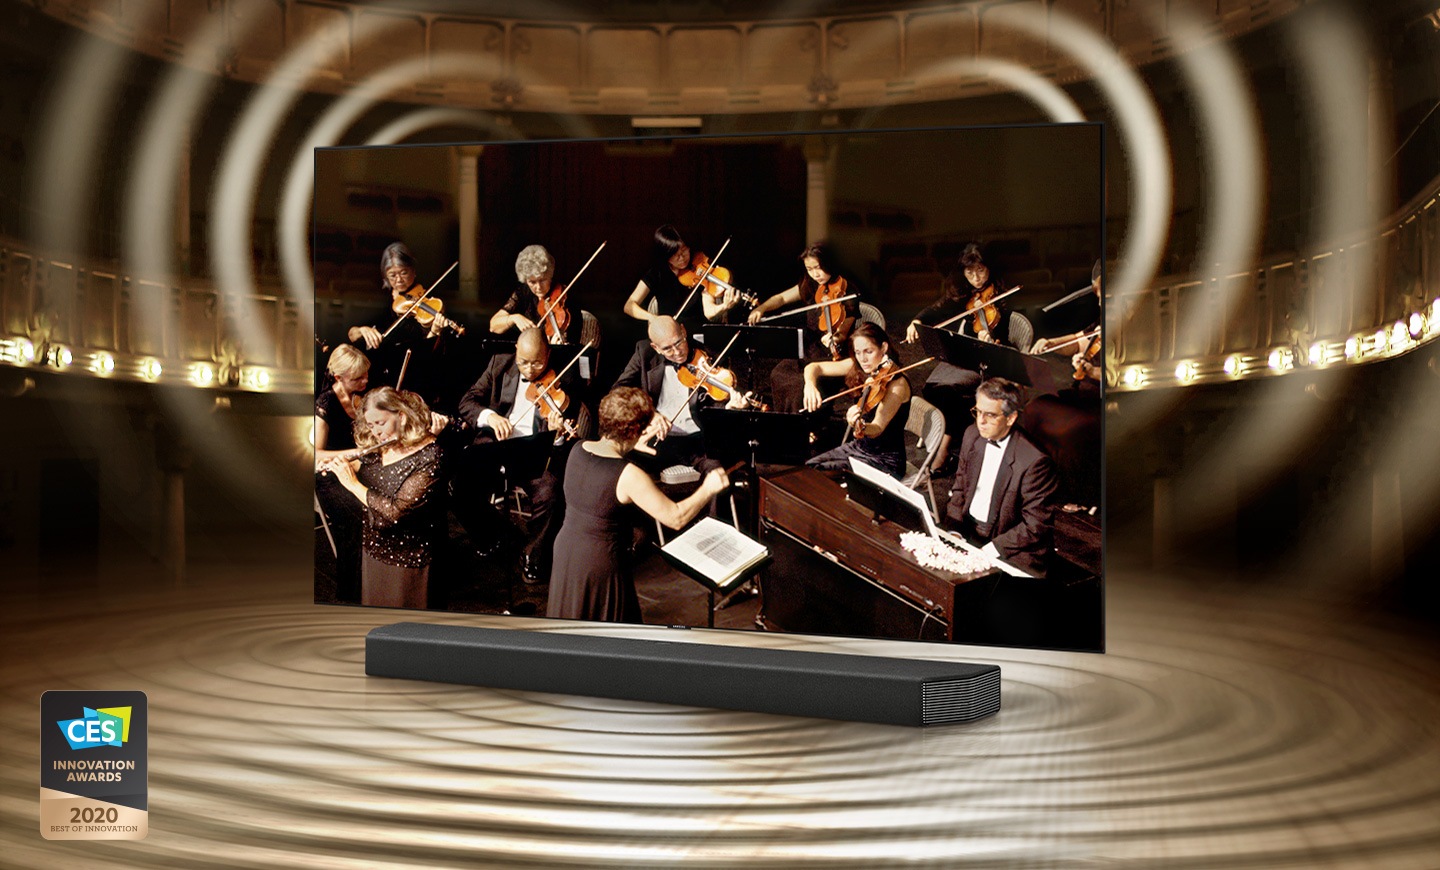 QLED TV and Soundbar in a theater with an orchestra playing onscreen. When Q-Symphony is on sound emits from TV and Soundbar. 2020 best of innovation, CES innovation awards logo is under the TV.